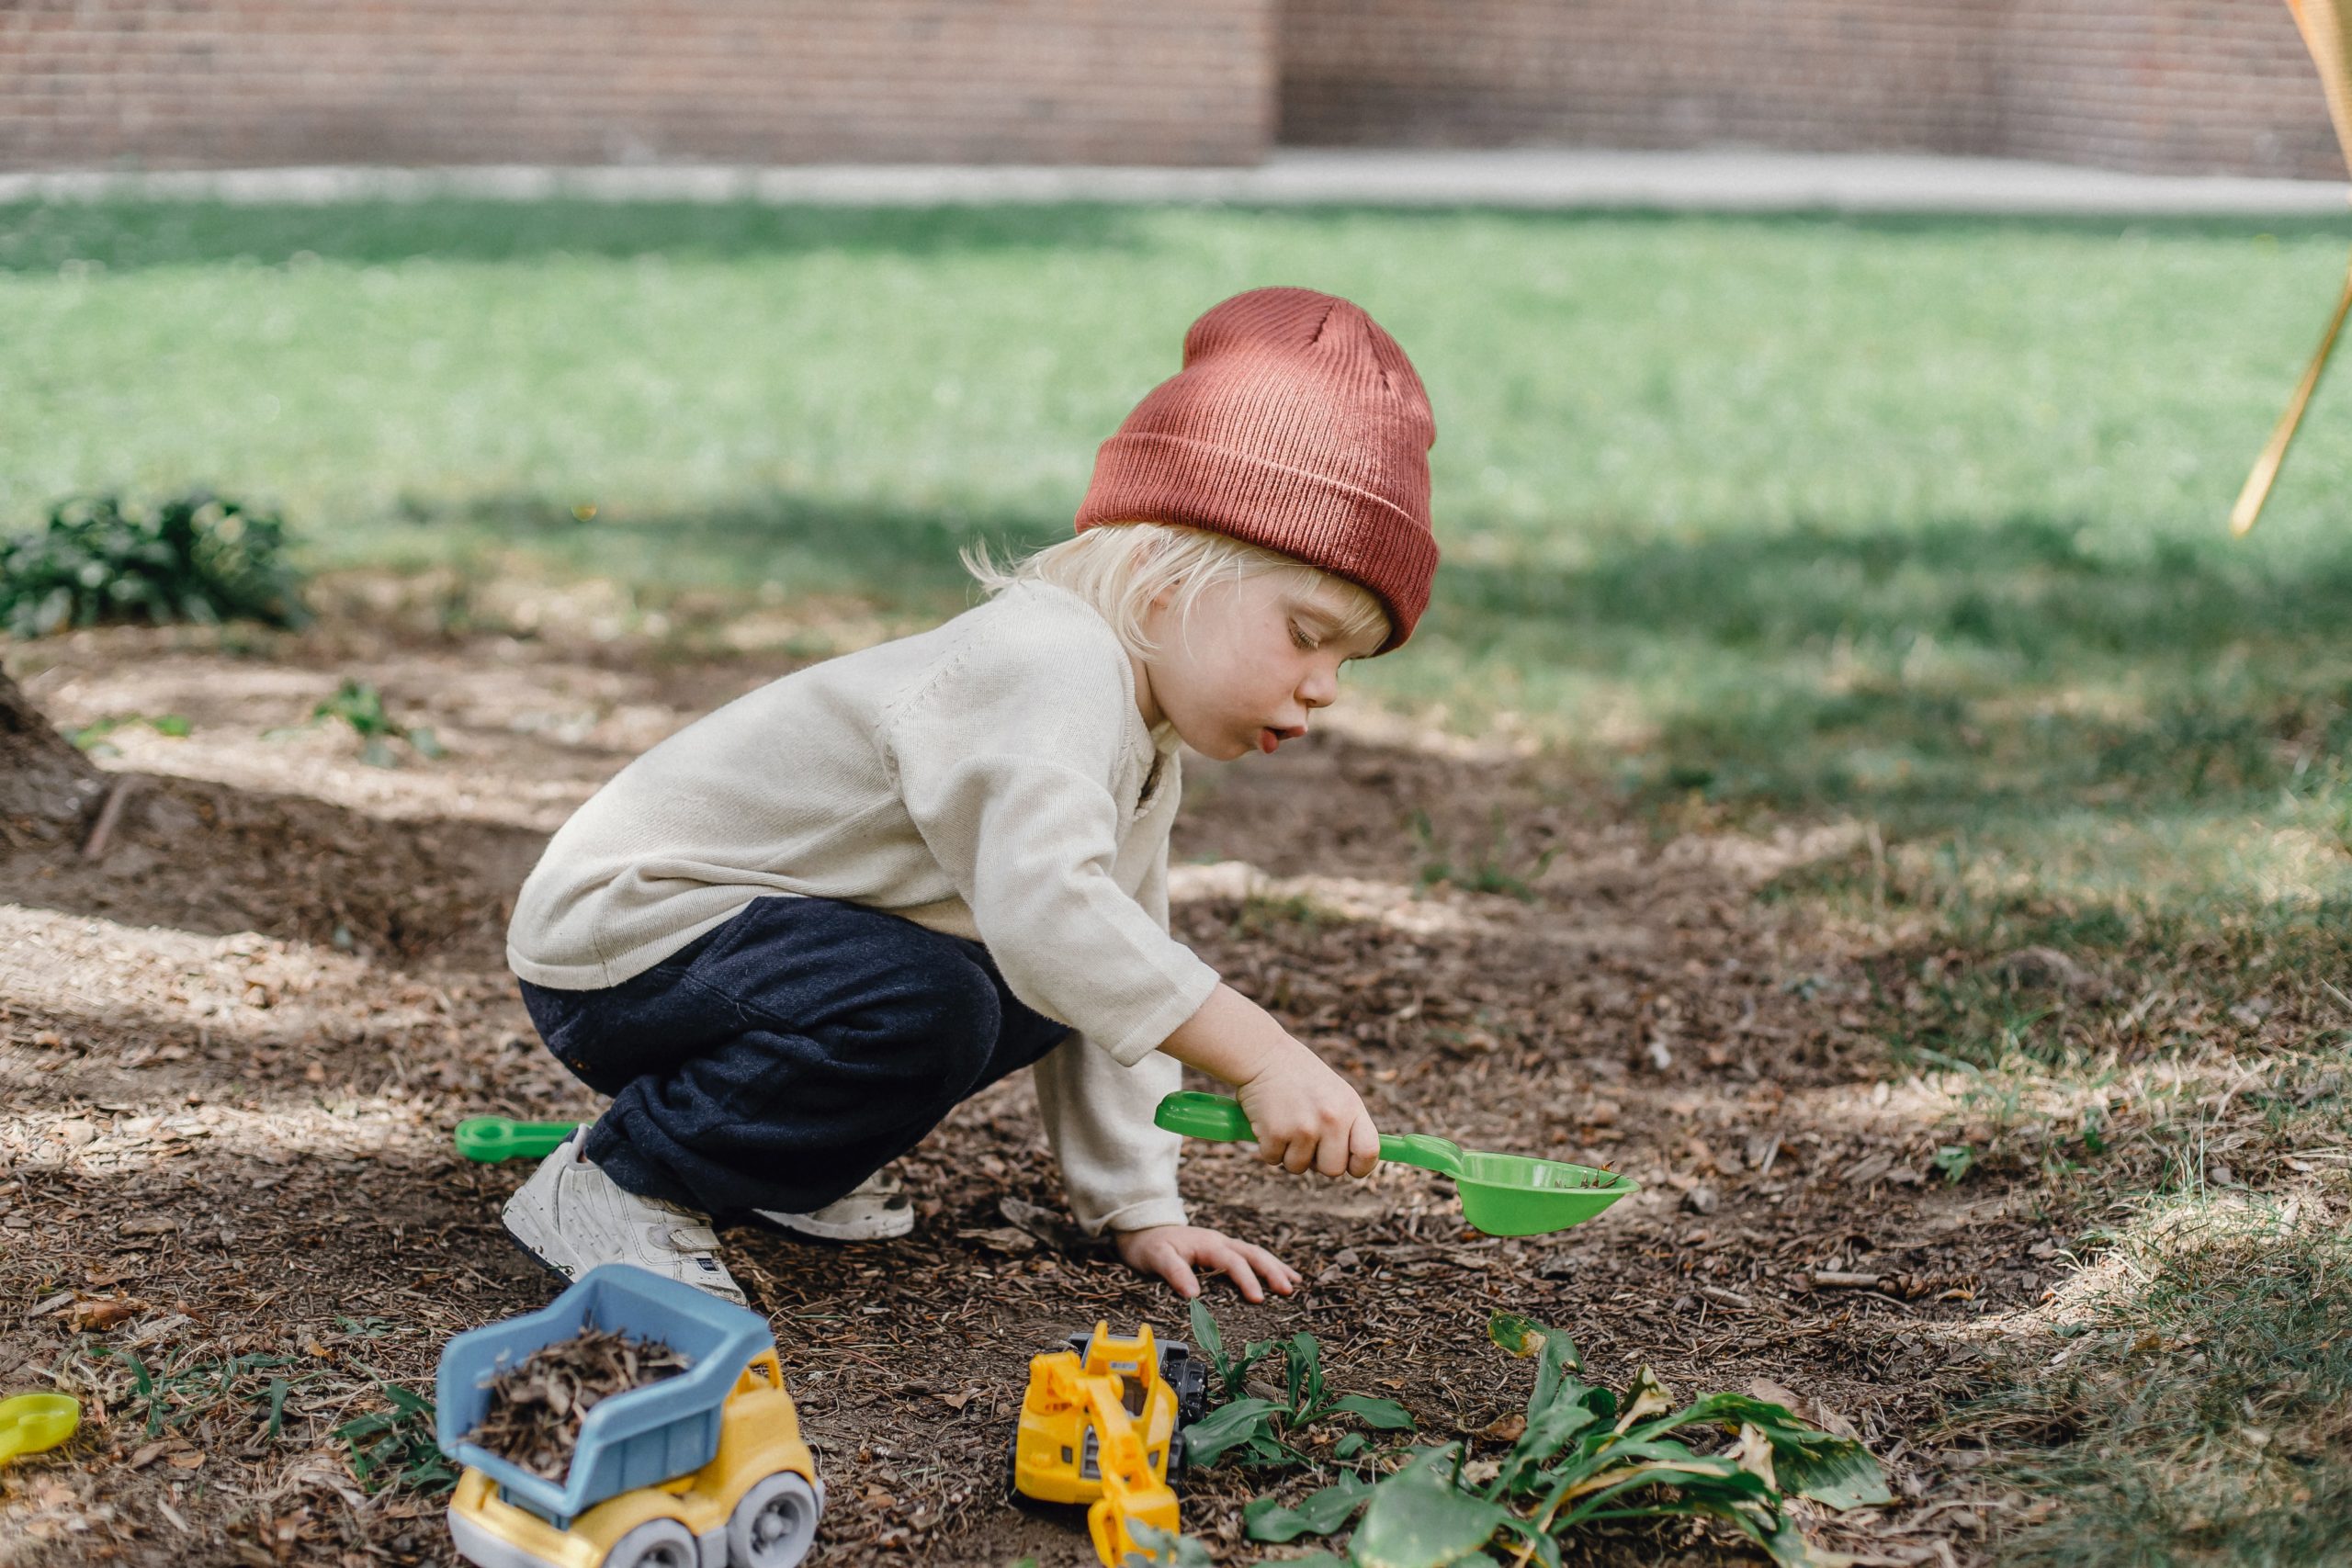 13 sensory play ideas for your own backyard